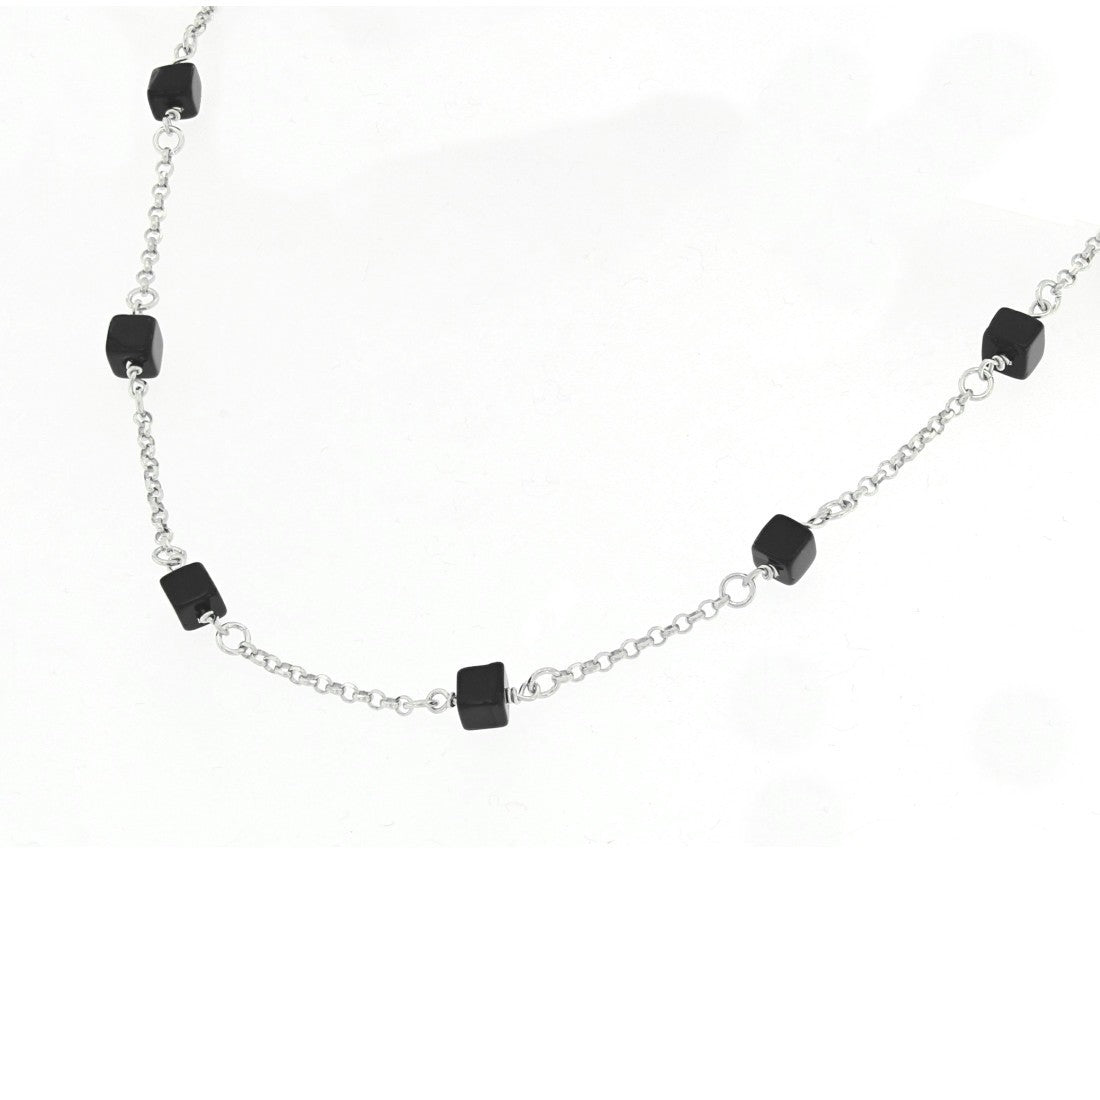 LONG SILVER AND ONYX NECKLACE